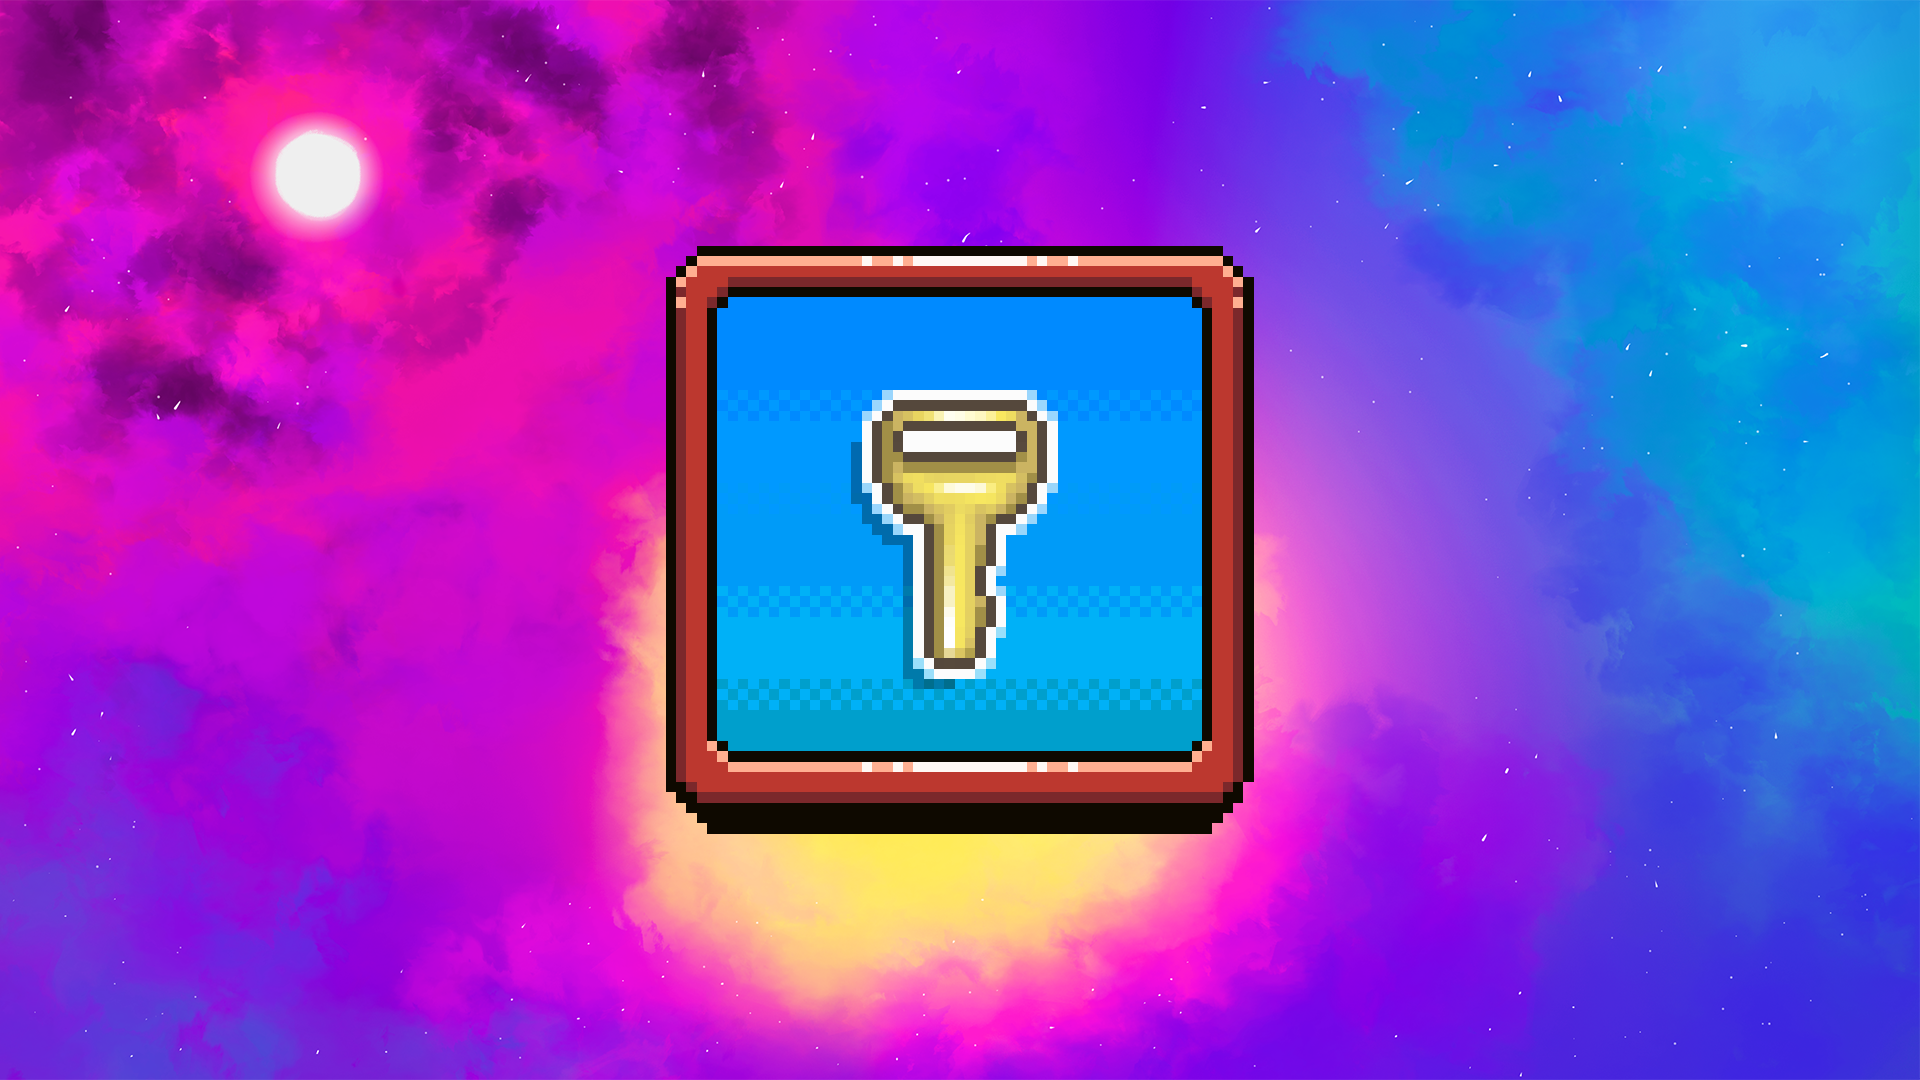 Icon for Breaking and Entering